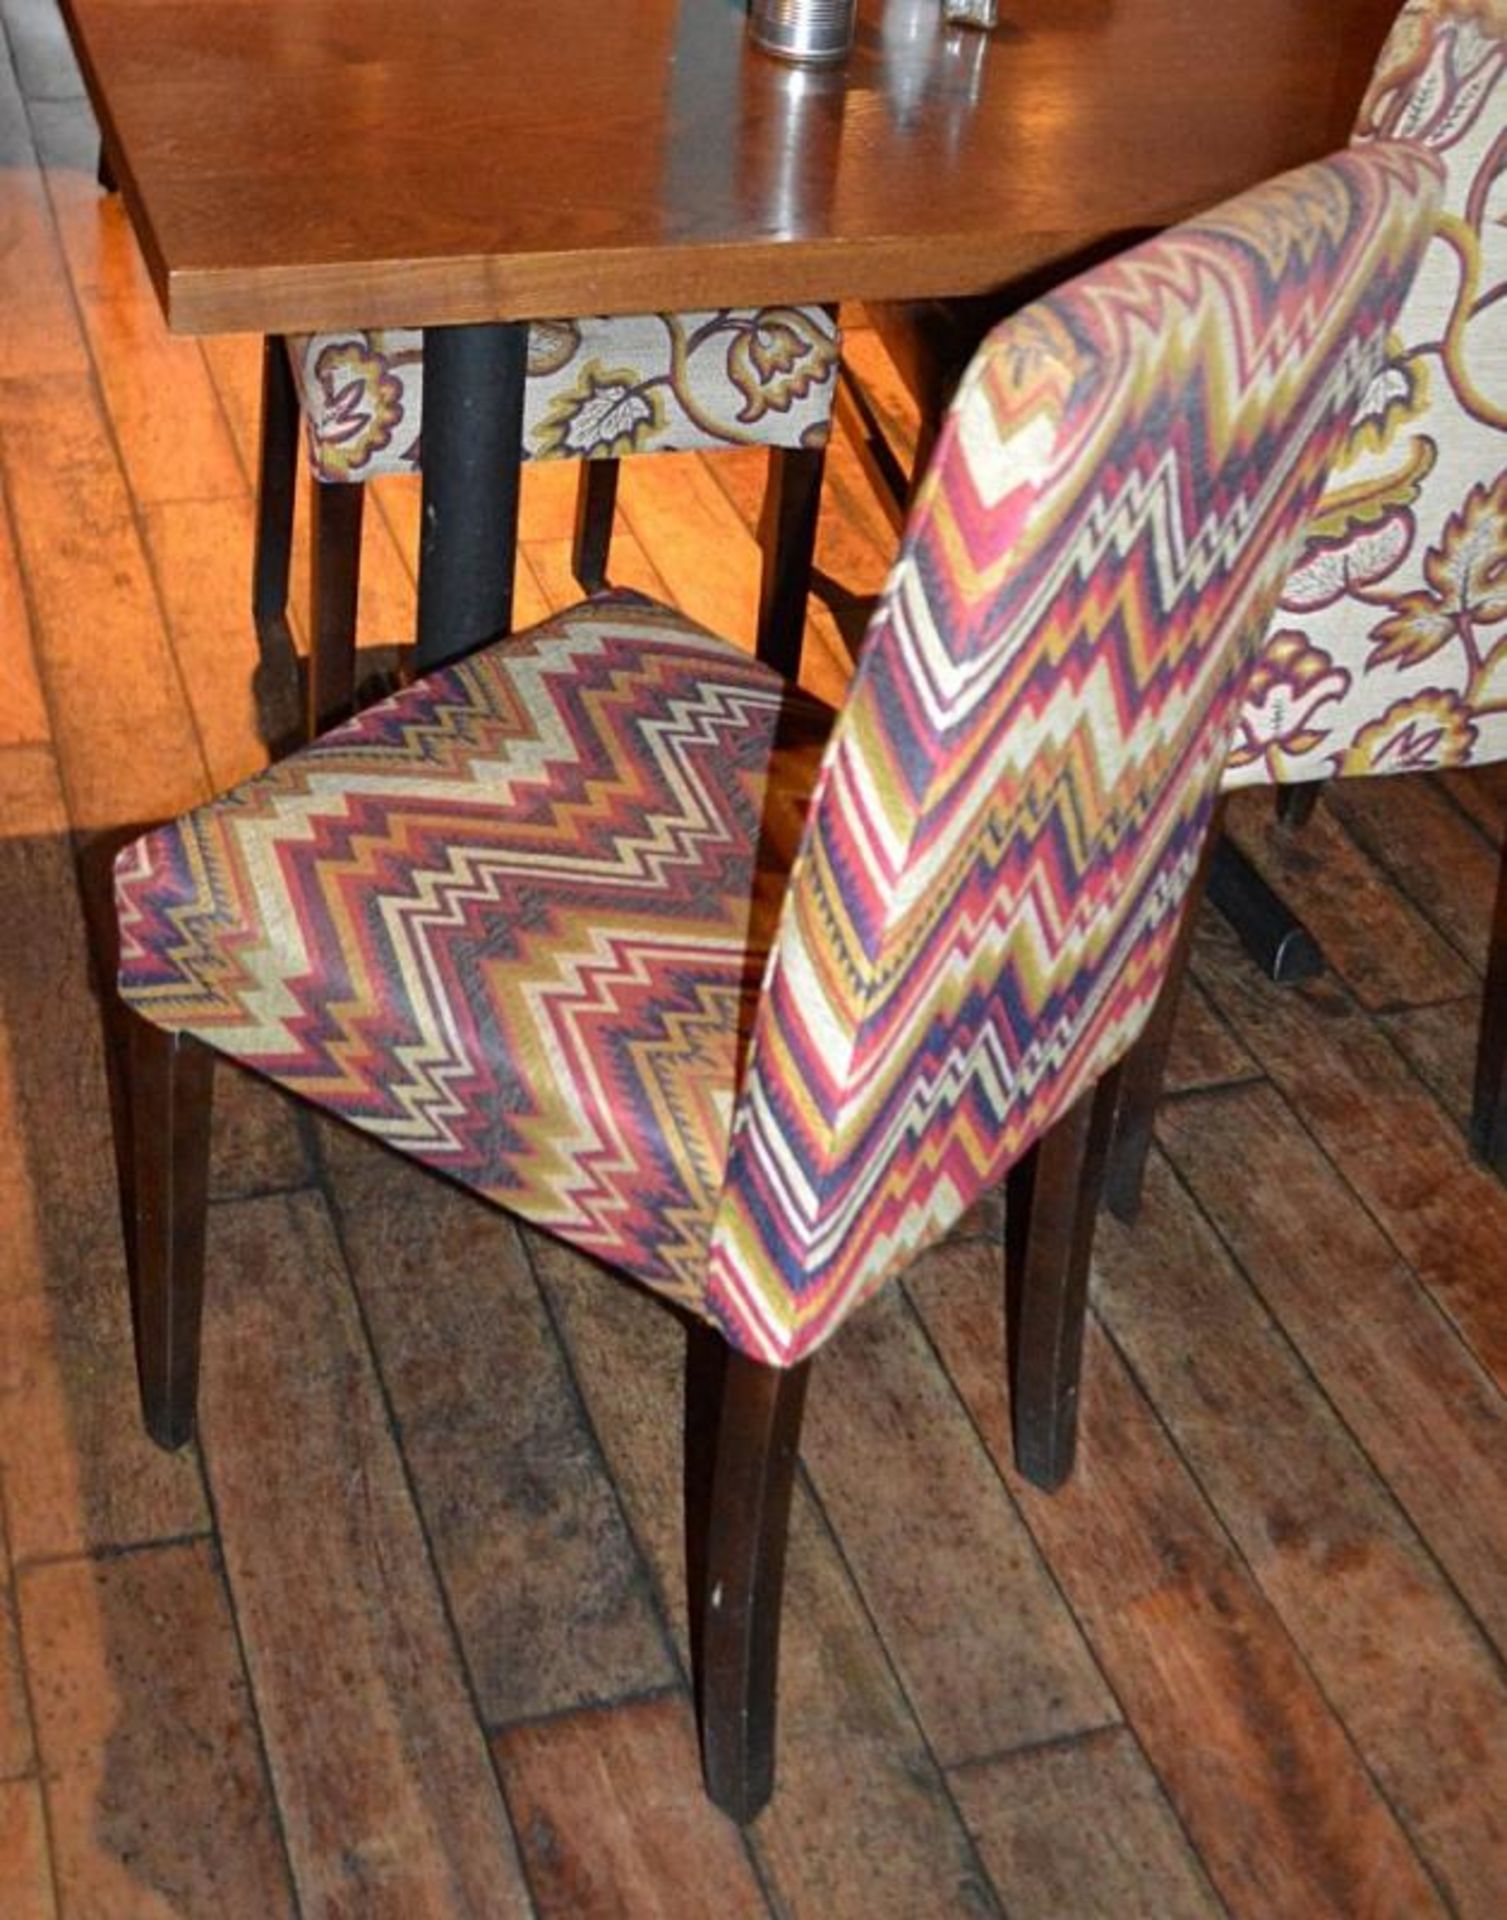 6 x Upholstered Restaurant Dining Chairs In A Zig Zag Mexican-style Fabric - Image 2 of 2